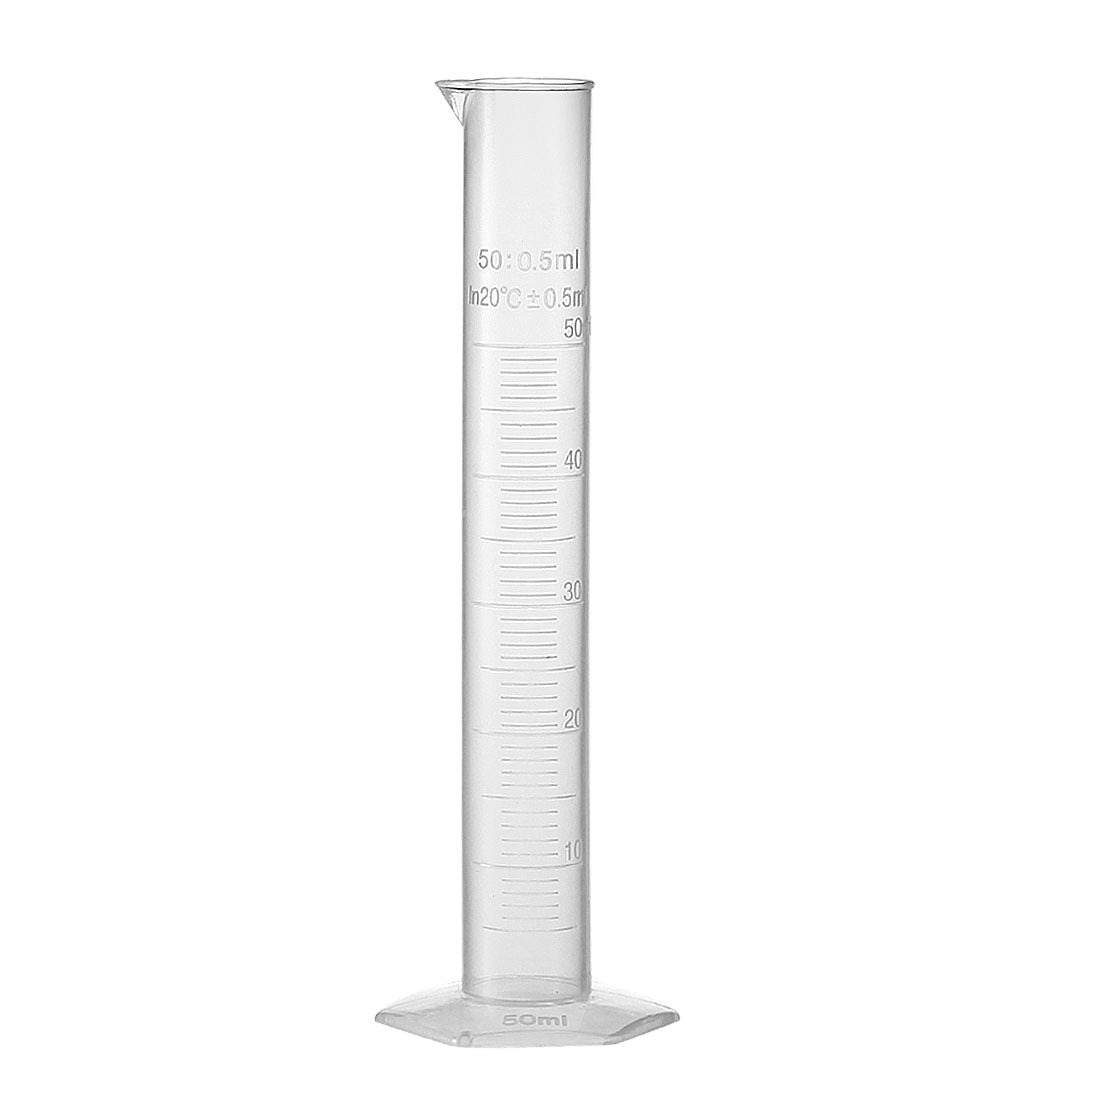 uxcell Uxcell 50ml Graduated Cylinder Laboratory Measurement Clear White Plastic Hex Base for Chemical Measuring